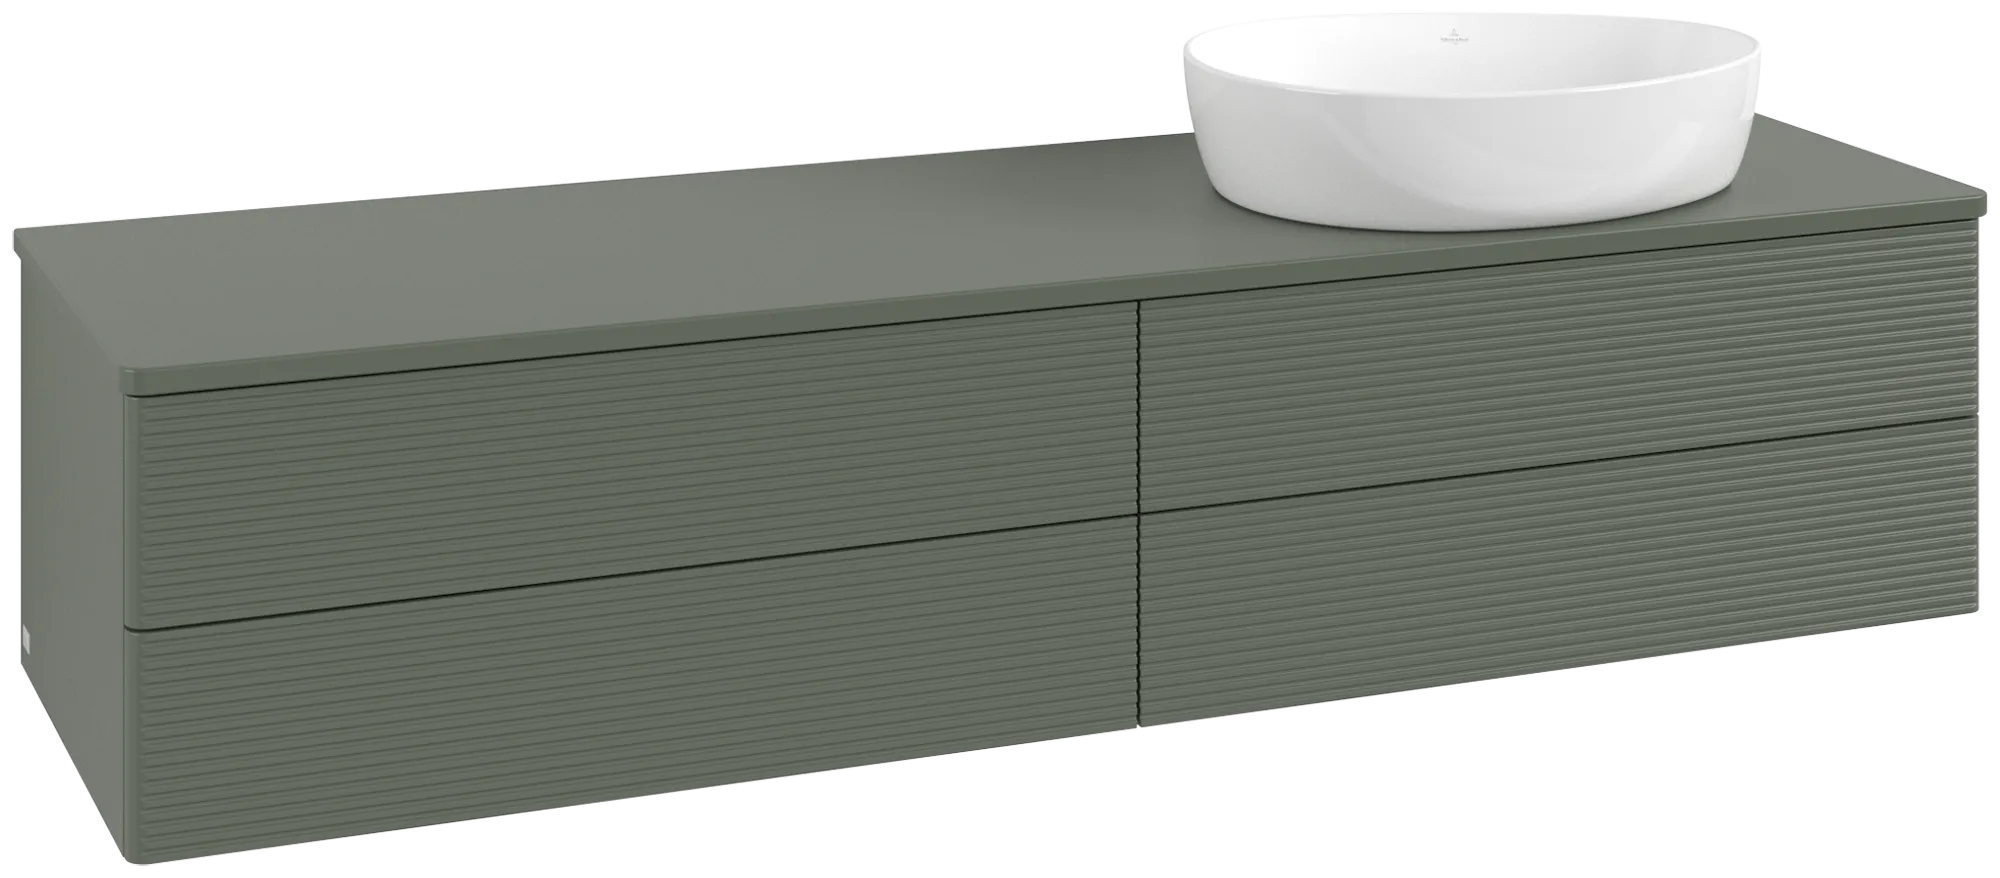 Obrázek VILLEROY BOCH Antao Vanity unit, 4 pull-out compartments, 1600 x 360 x 500 mm, Front with grain texture, Leaf Green Matt Lacquer / Leaf Green Matt Lacquer #K27150HL